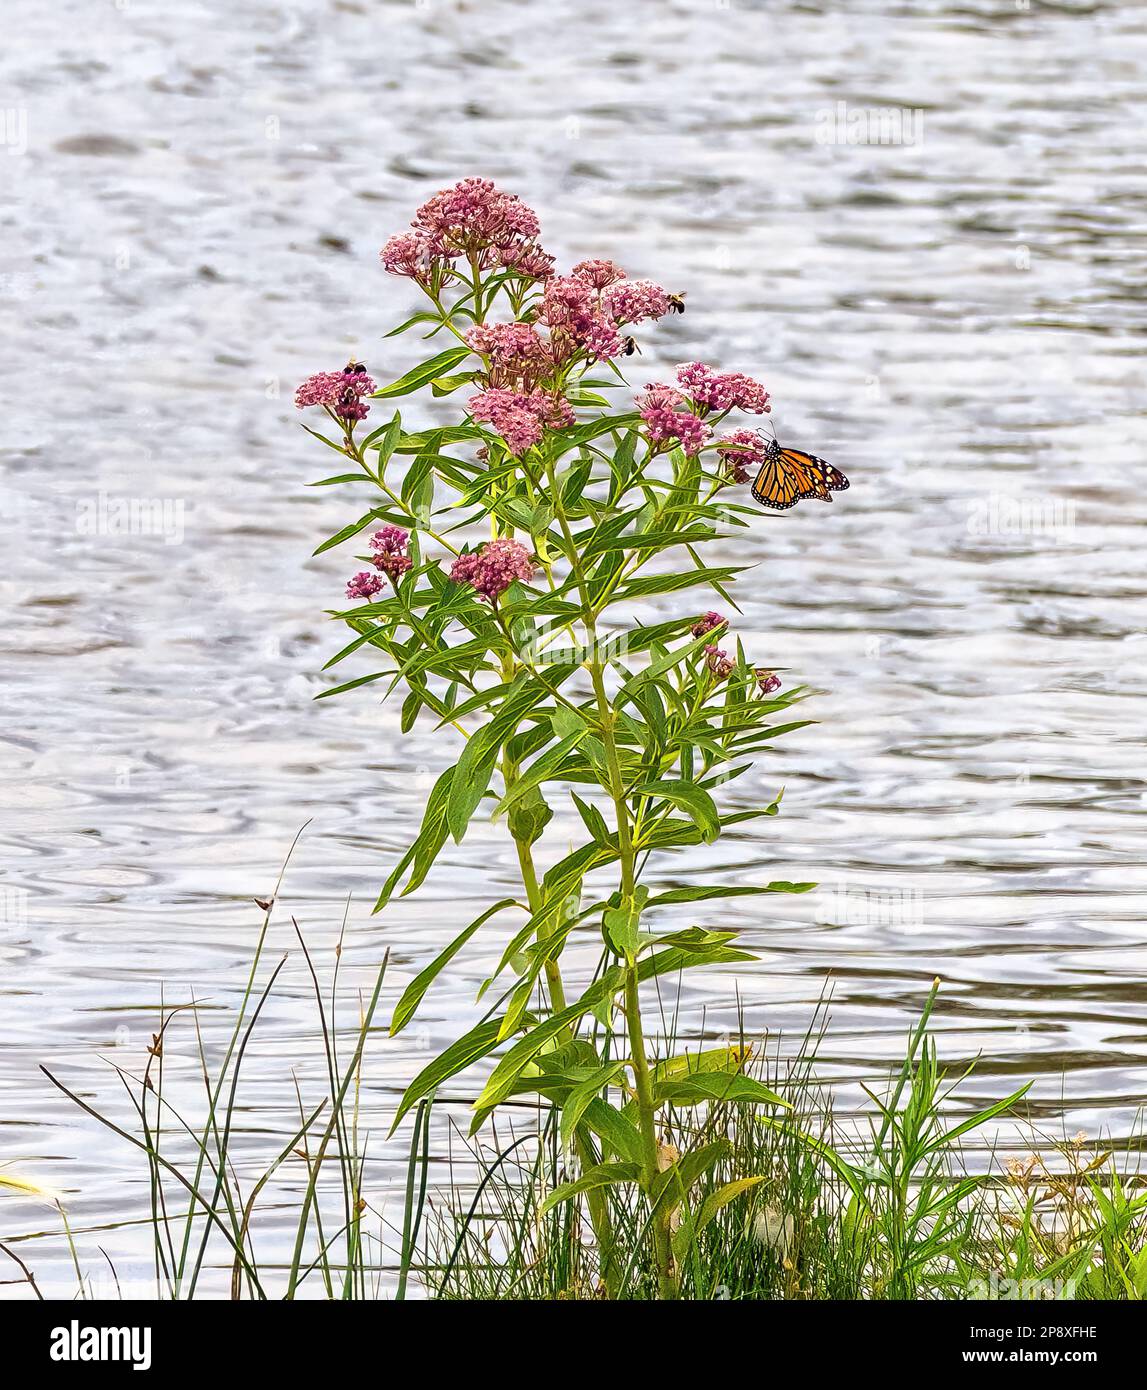 A Swamp Milkweed plant by the edge of a lake with various pollinators including a Monarch butterfly and some bumblebees. Stock Photo